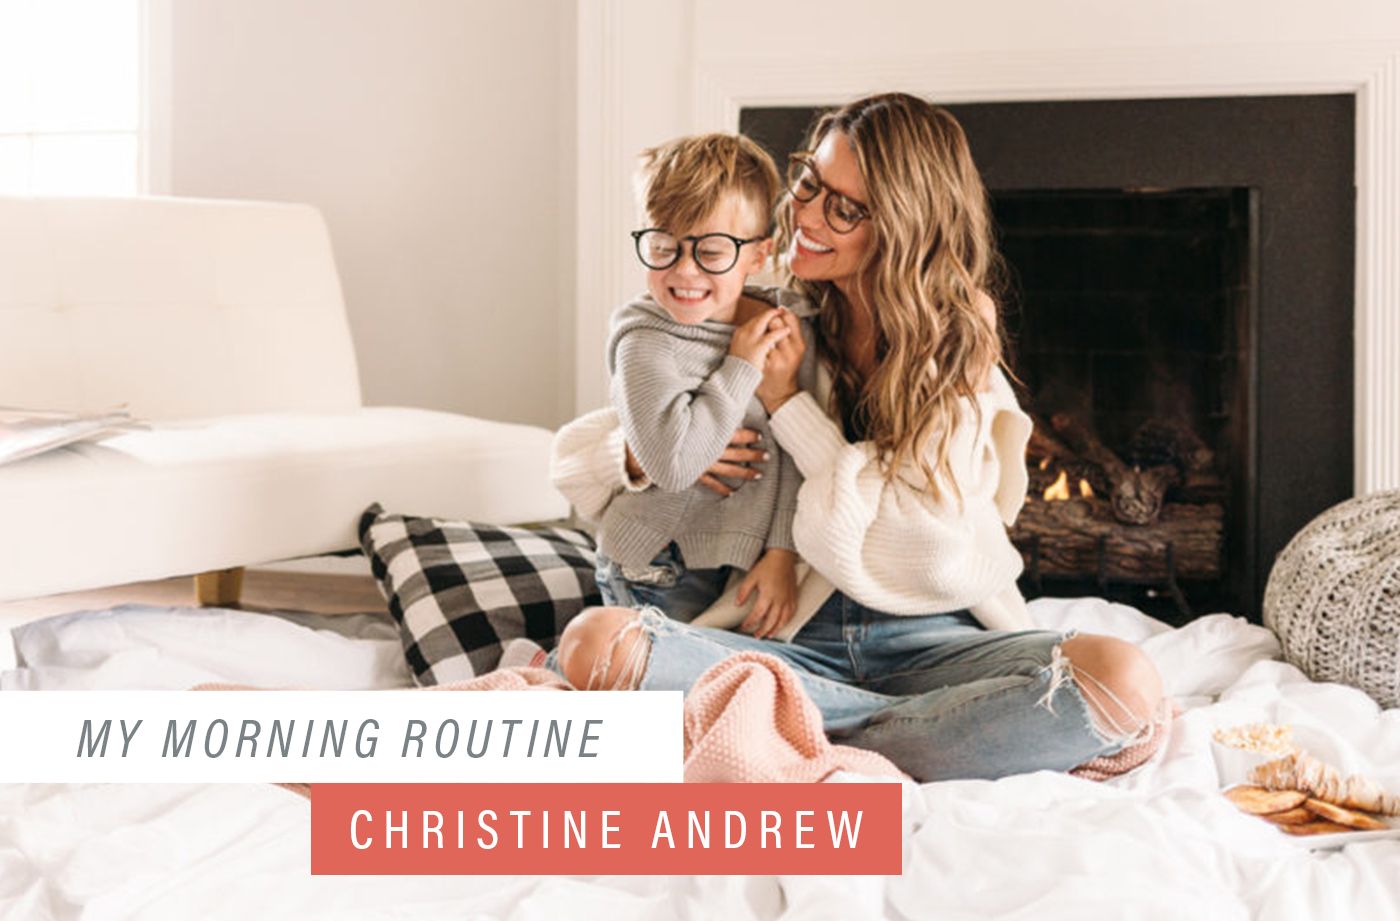 Christine Andrew's morning routine